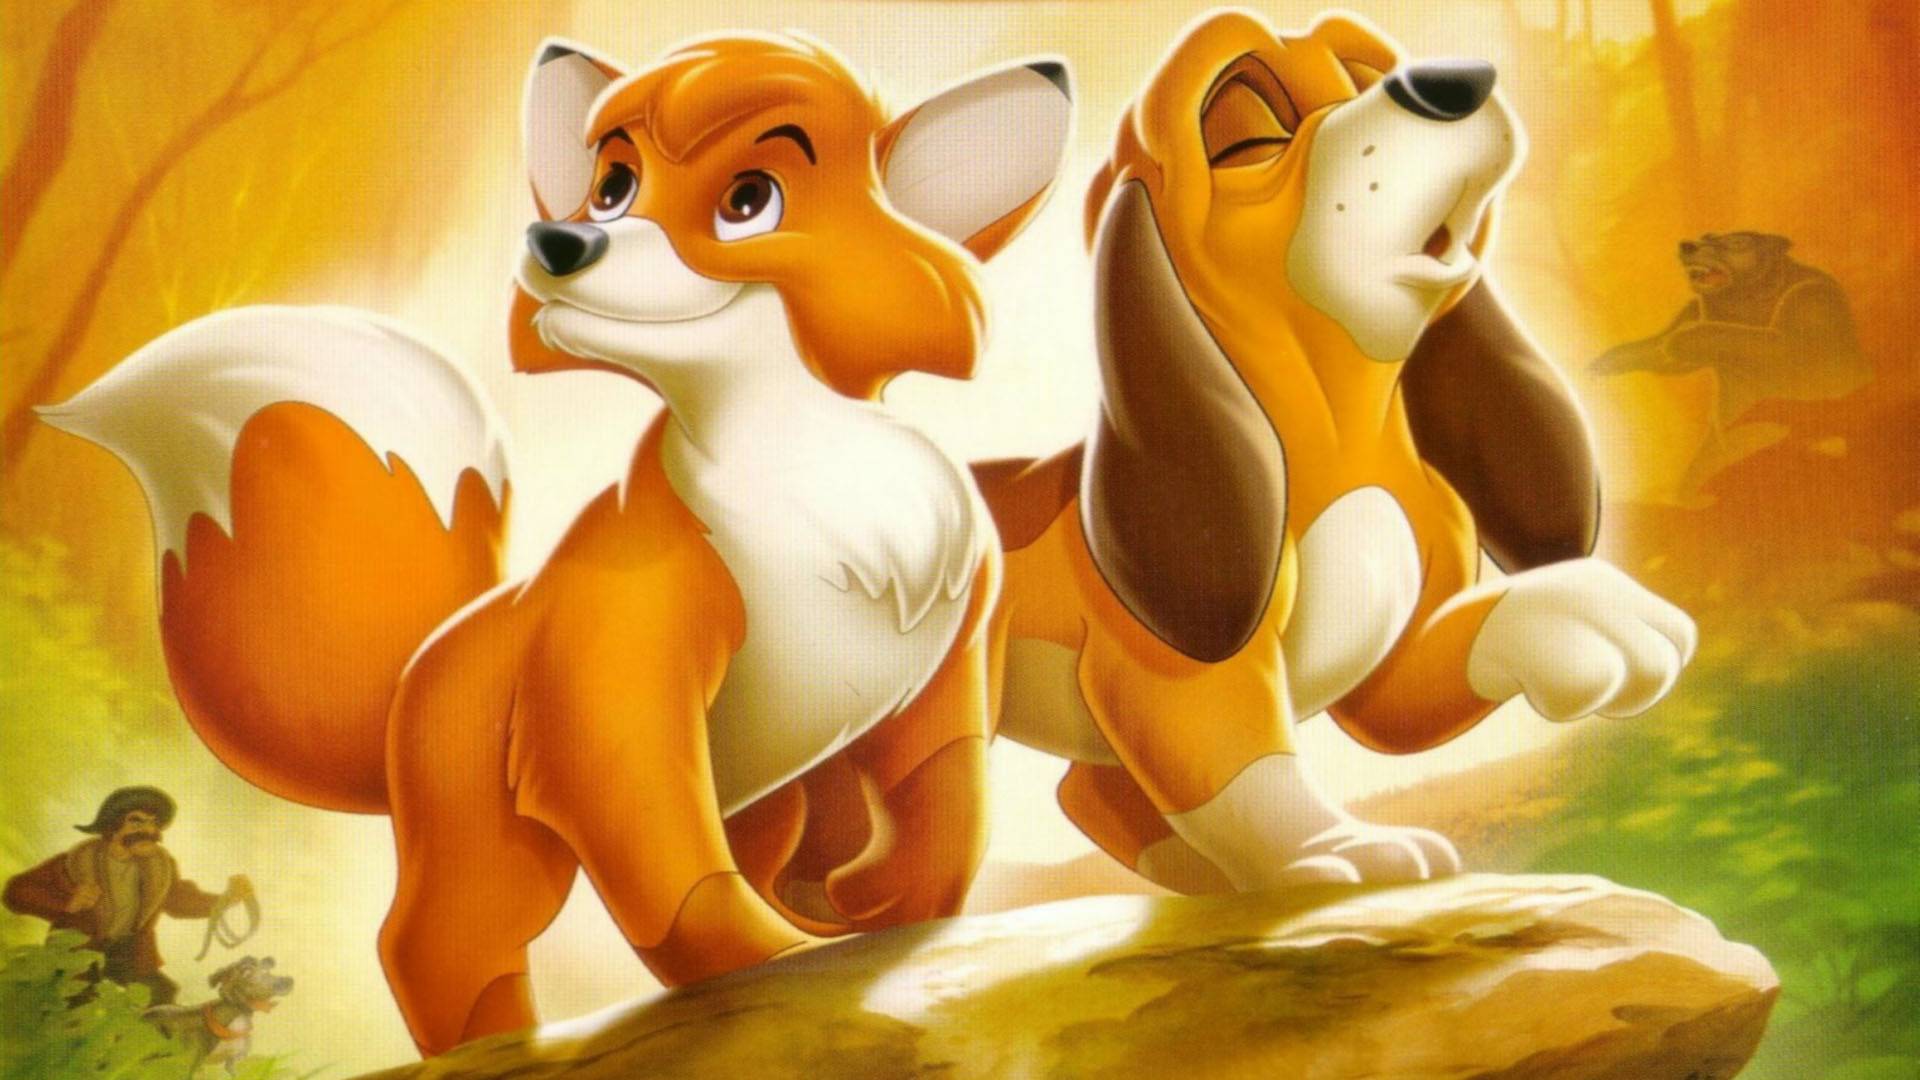 Nice wallpapers The Fox And The Hound 1920x1080px